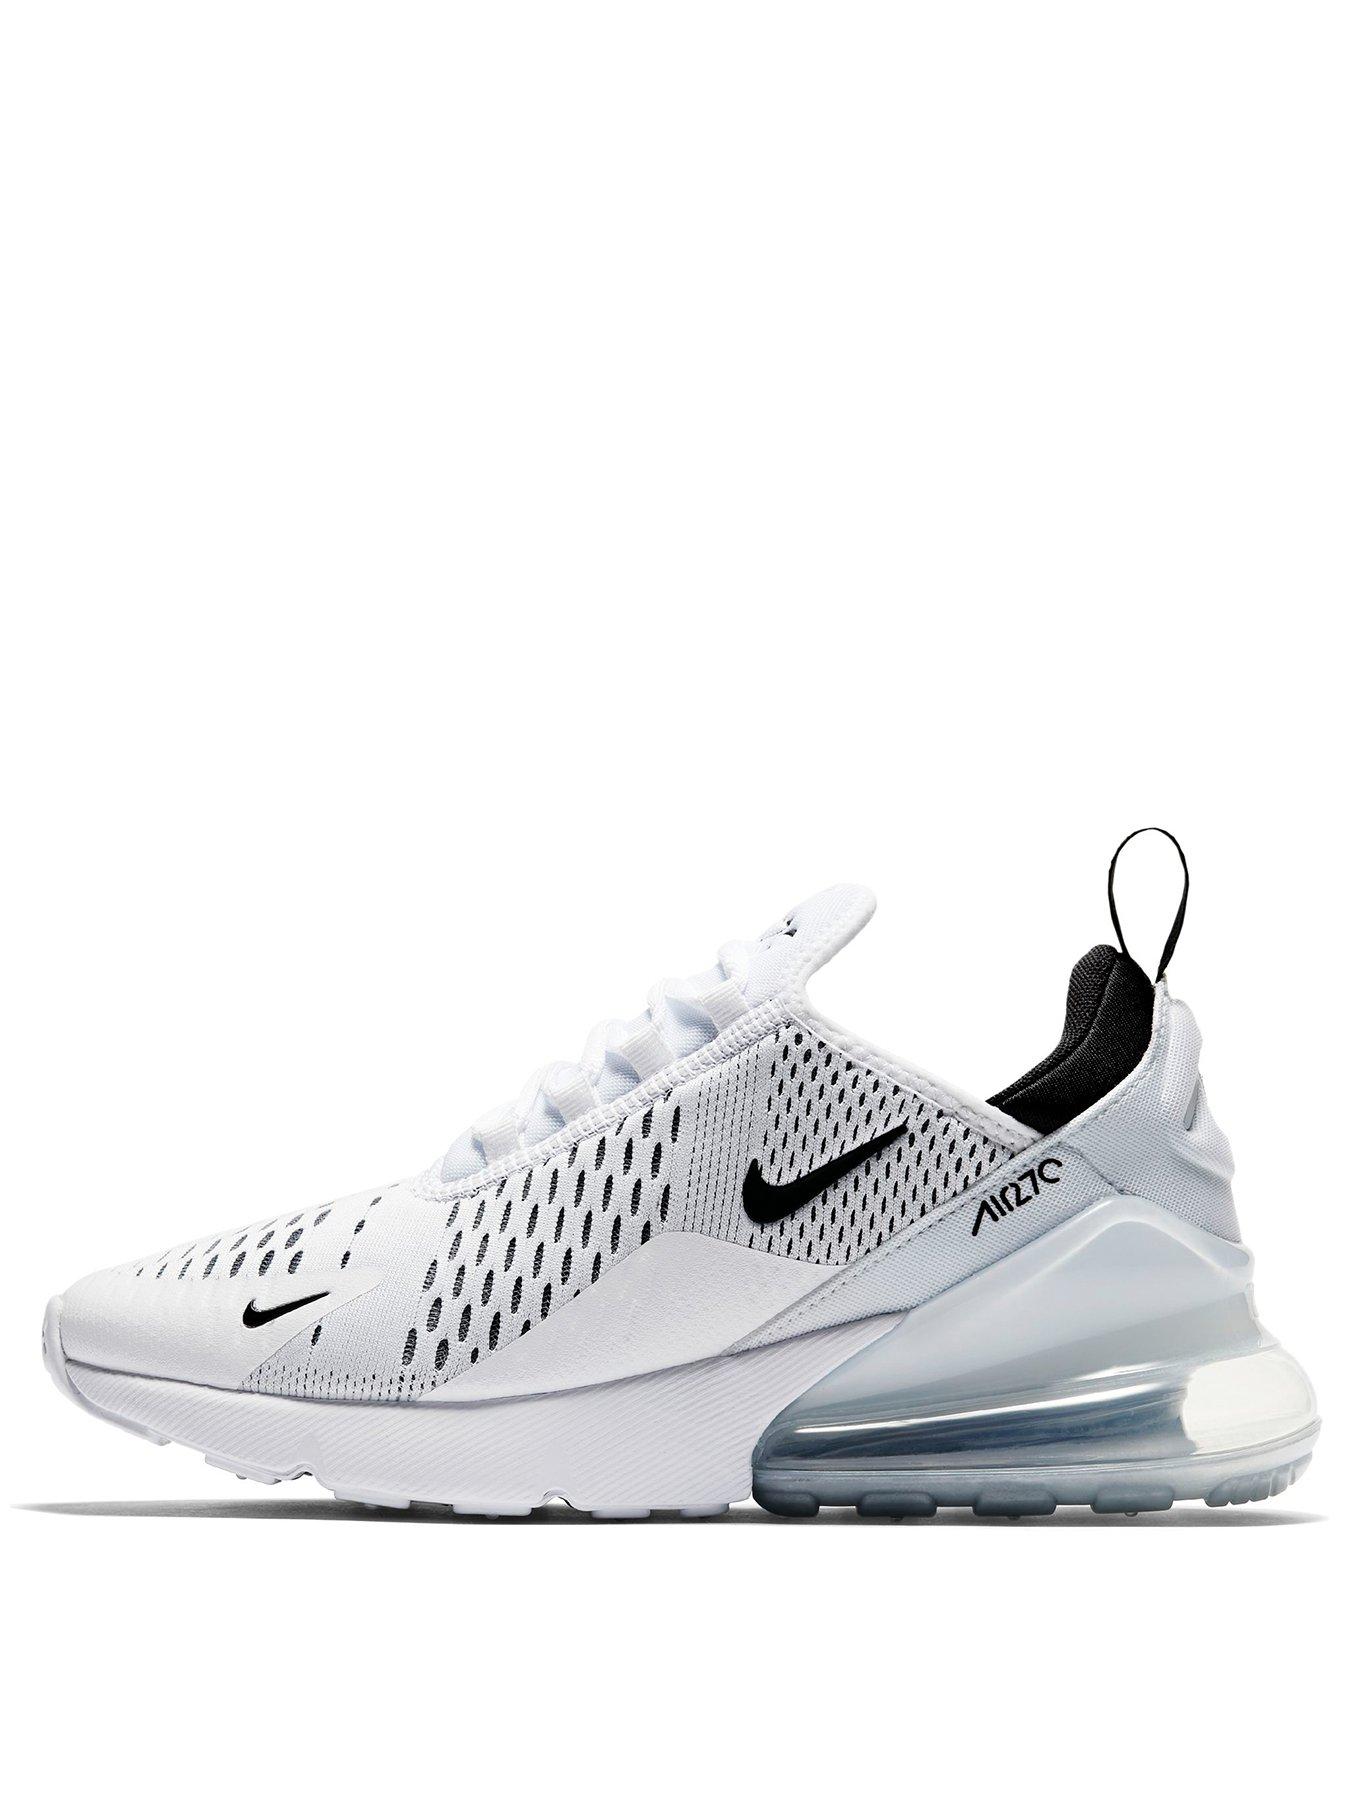 Nike Air Max 270 - White | littlewoods.com